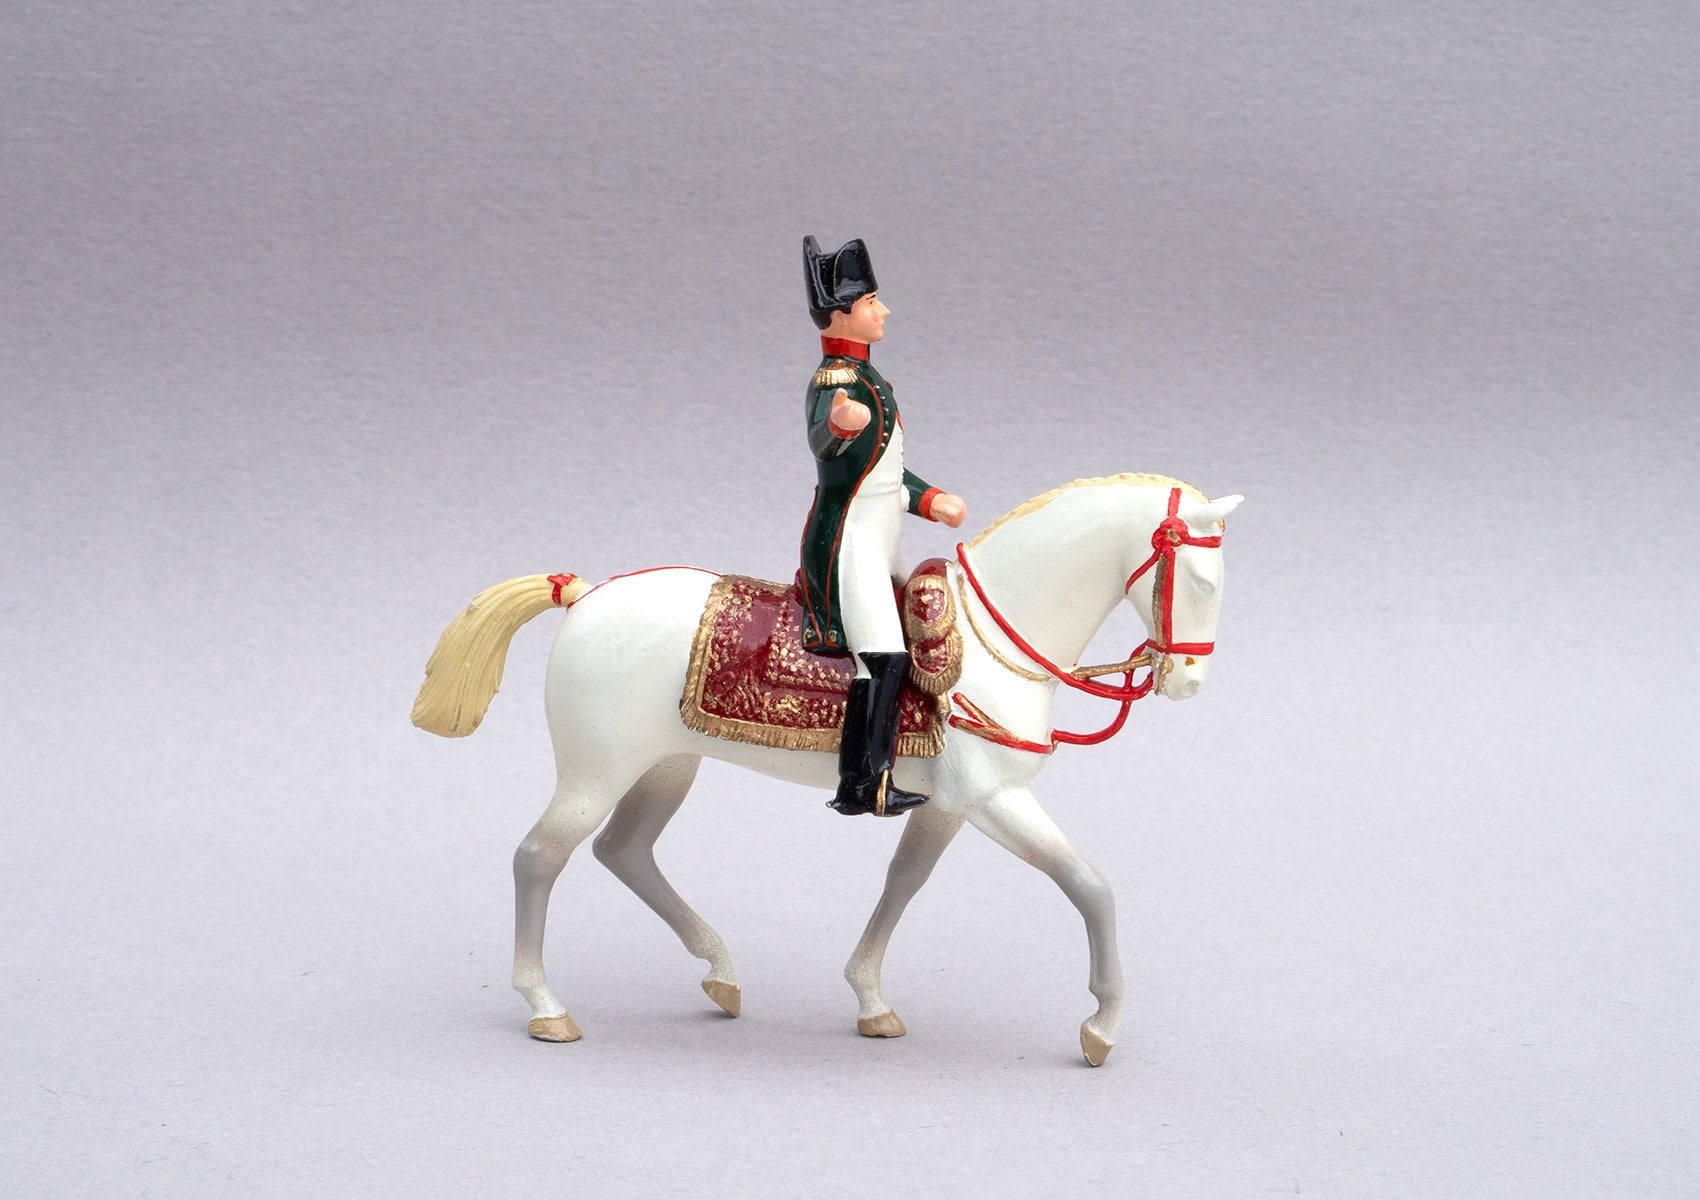 Set 93 Napoleon, 1st Emperor of France | French | Napoleonic Wars | Bicorne hat and chasseur a cheval uniform. Riding his famous warhorse, Marengo | Waterloo | © Imperial Productions | Sculpt by David Cowe